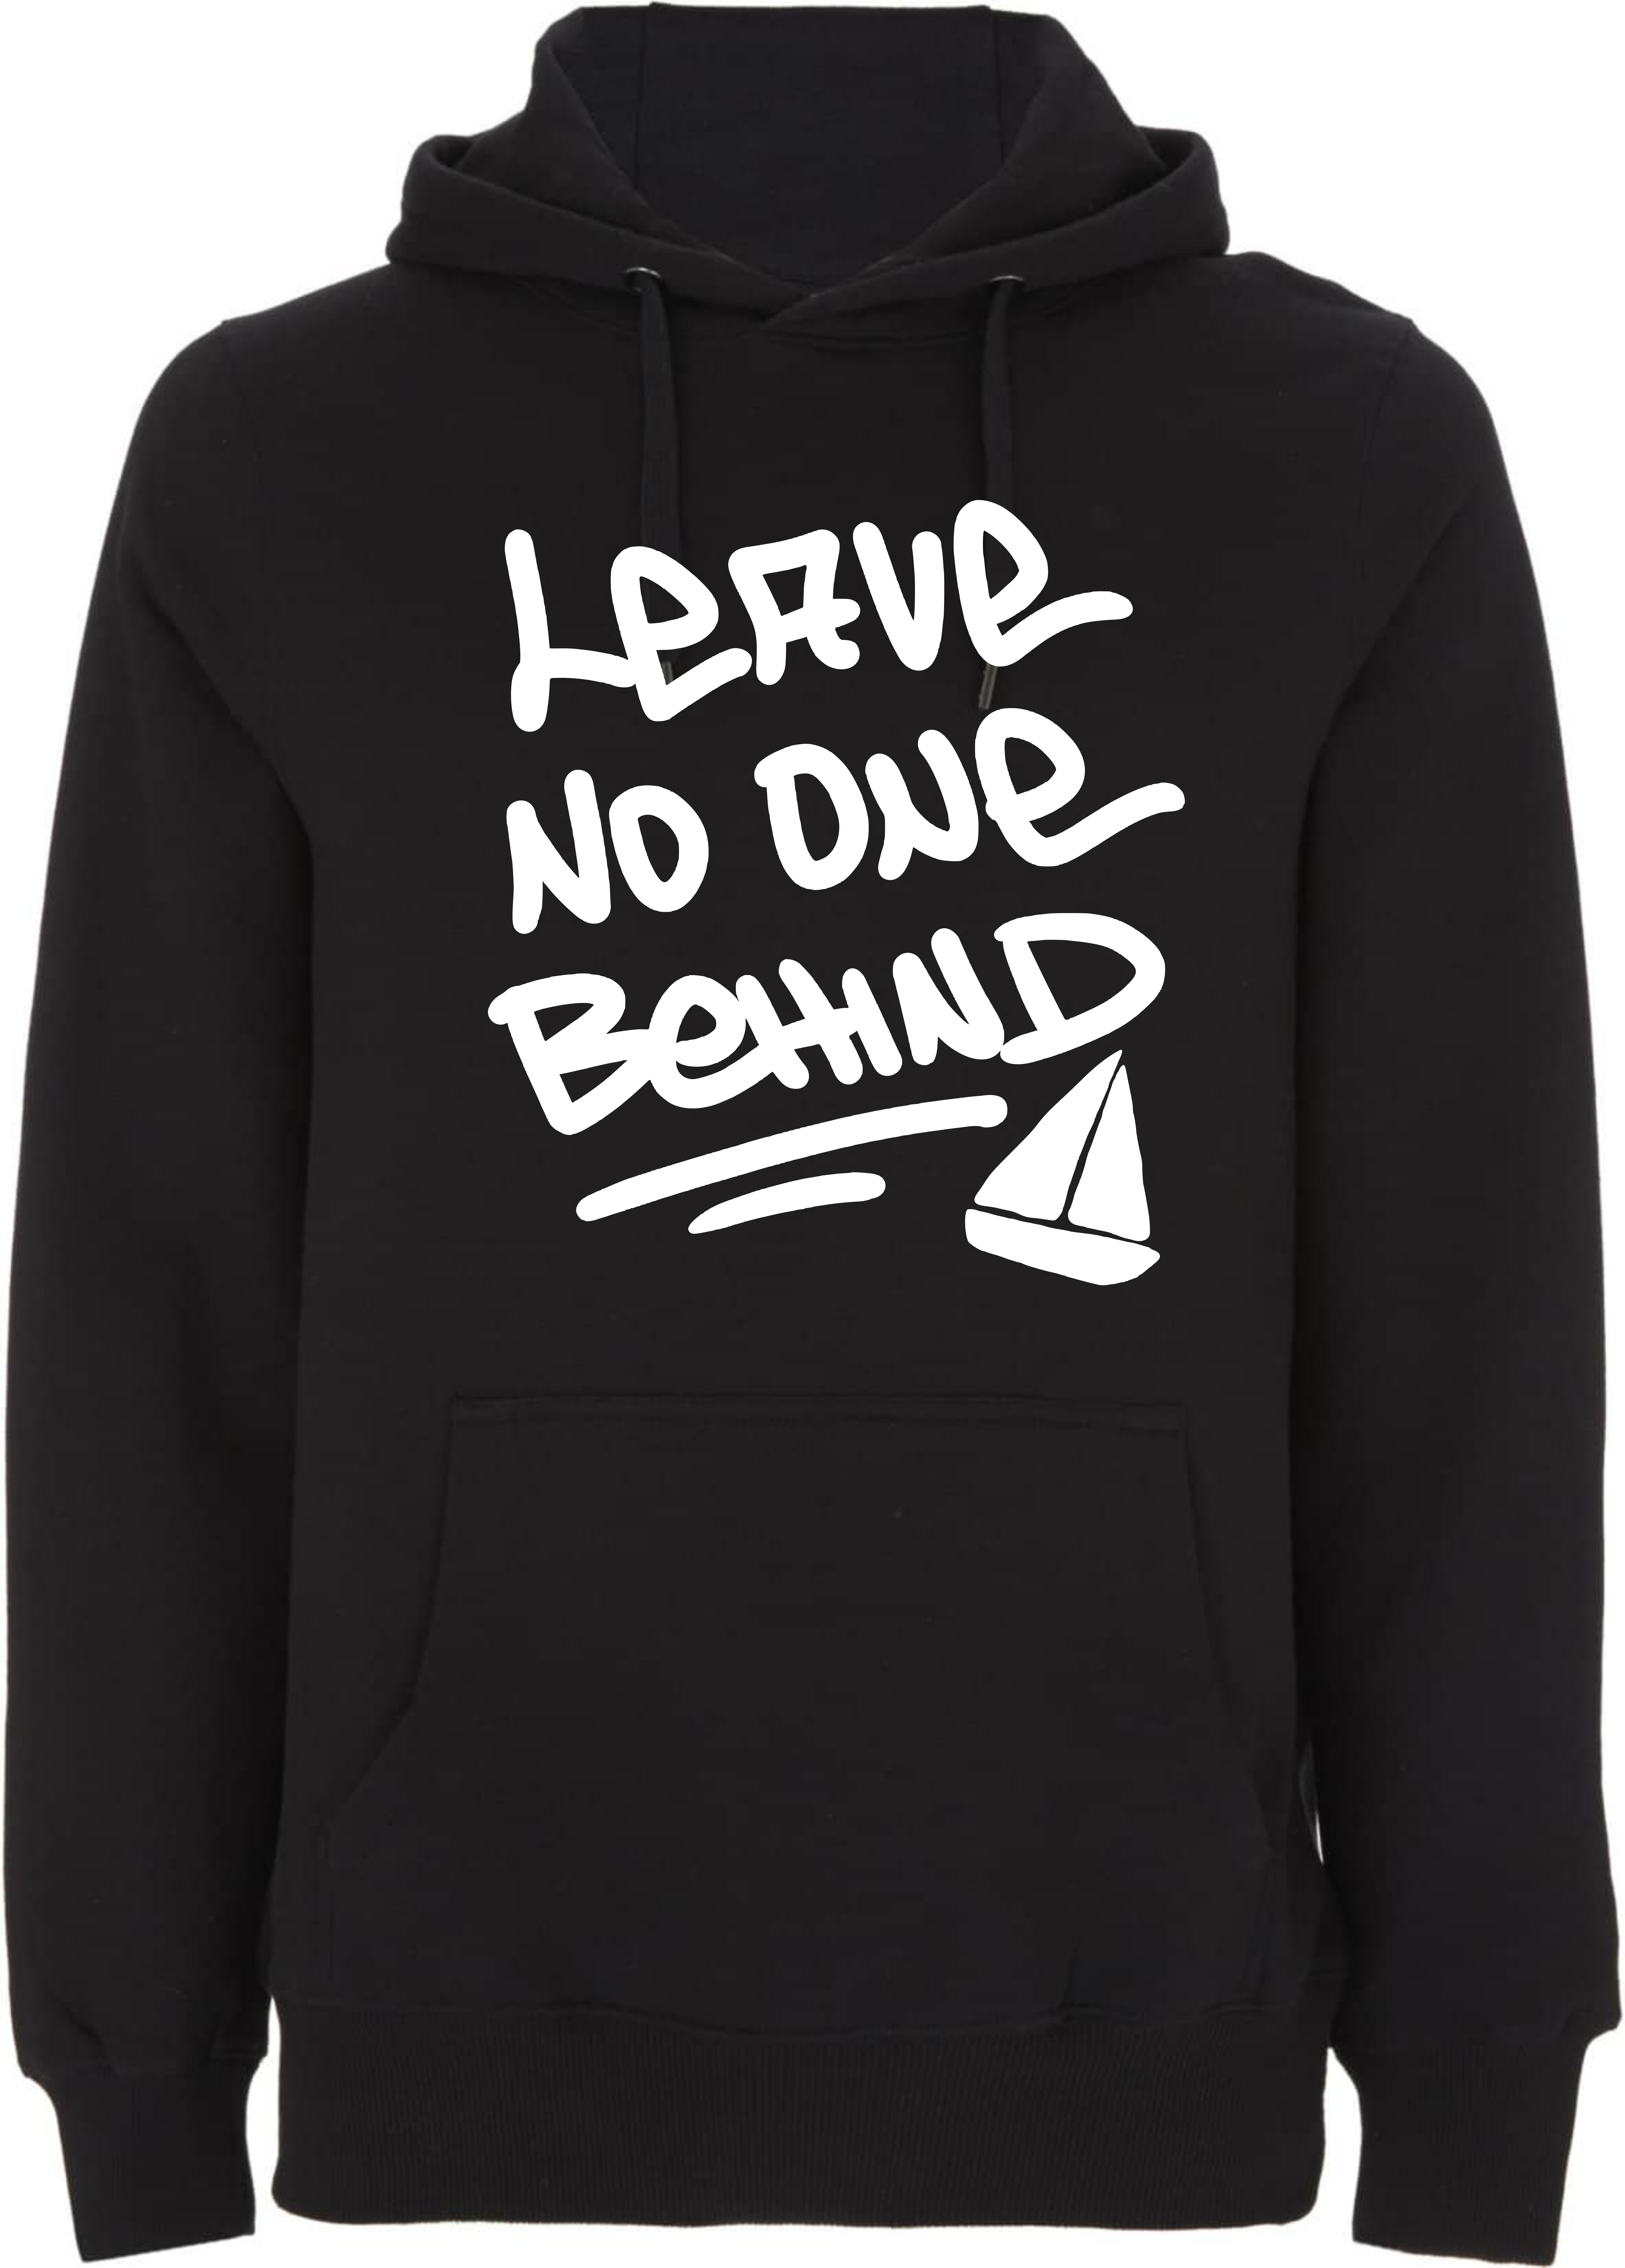 Leave no one Behind | Unisex Pullover